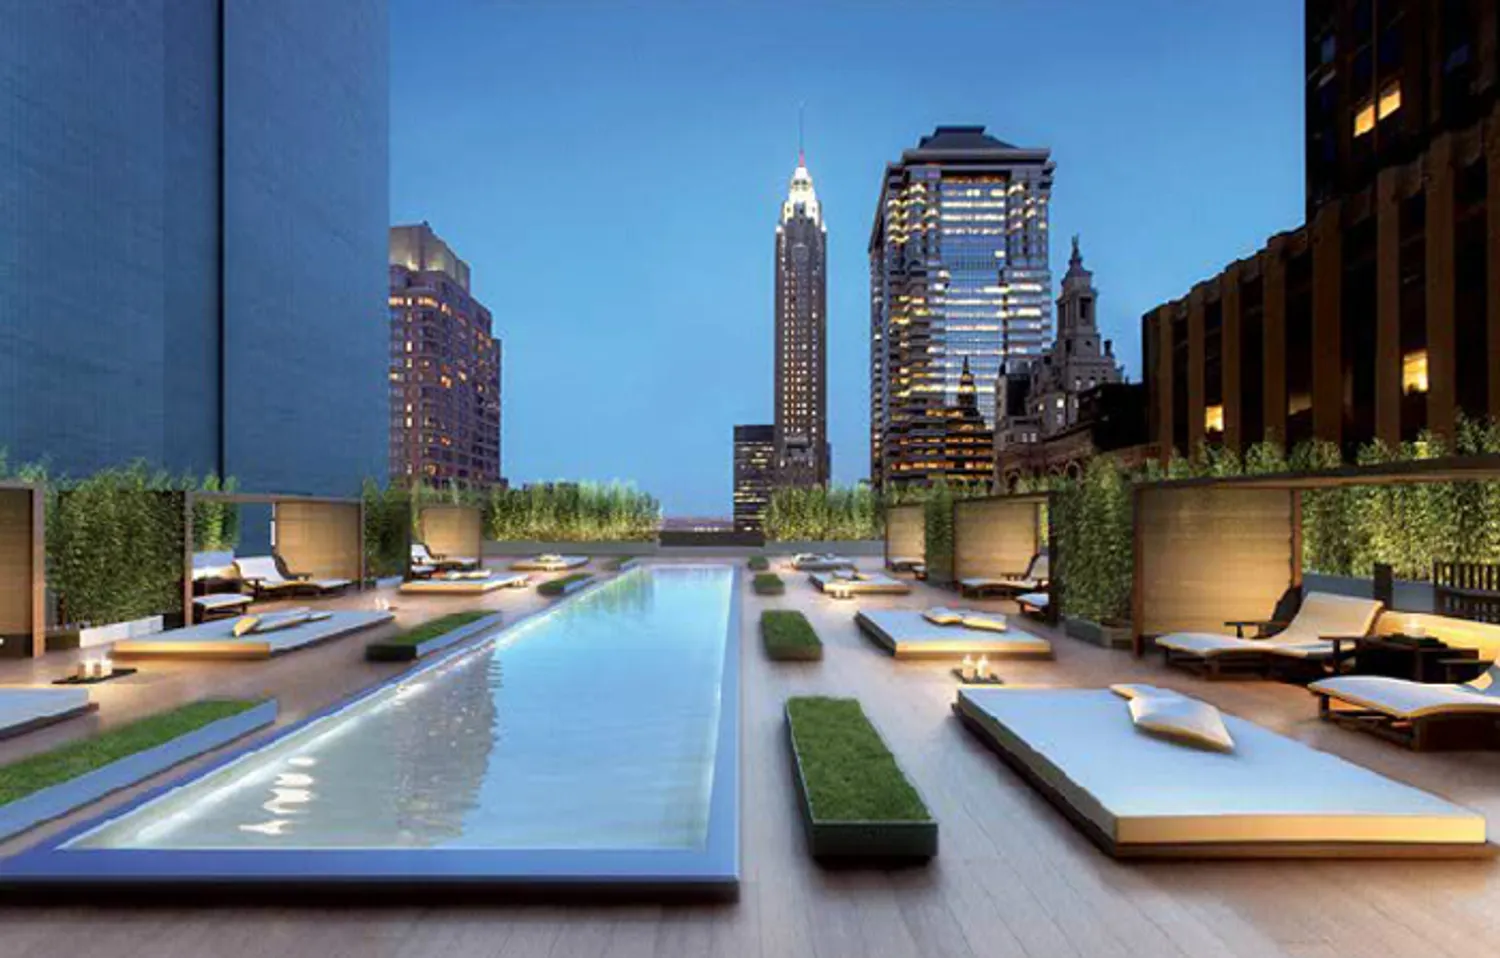 Terrace With Reflecting Pool